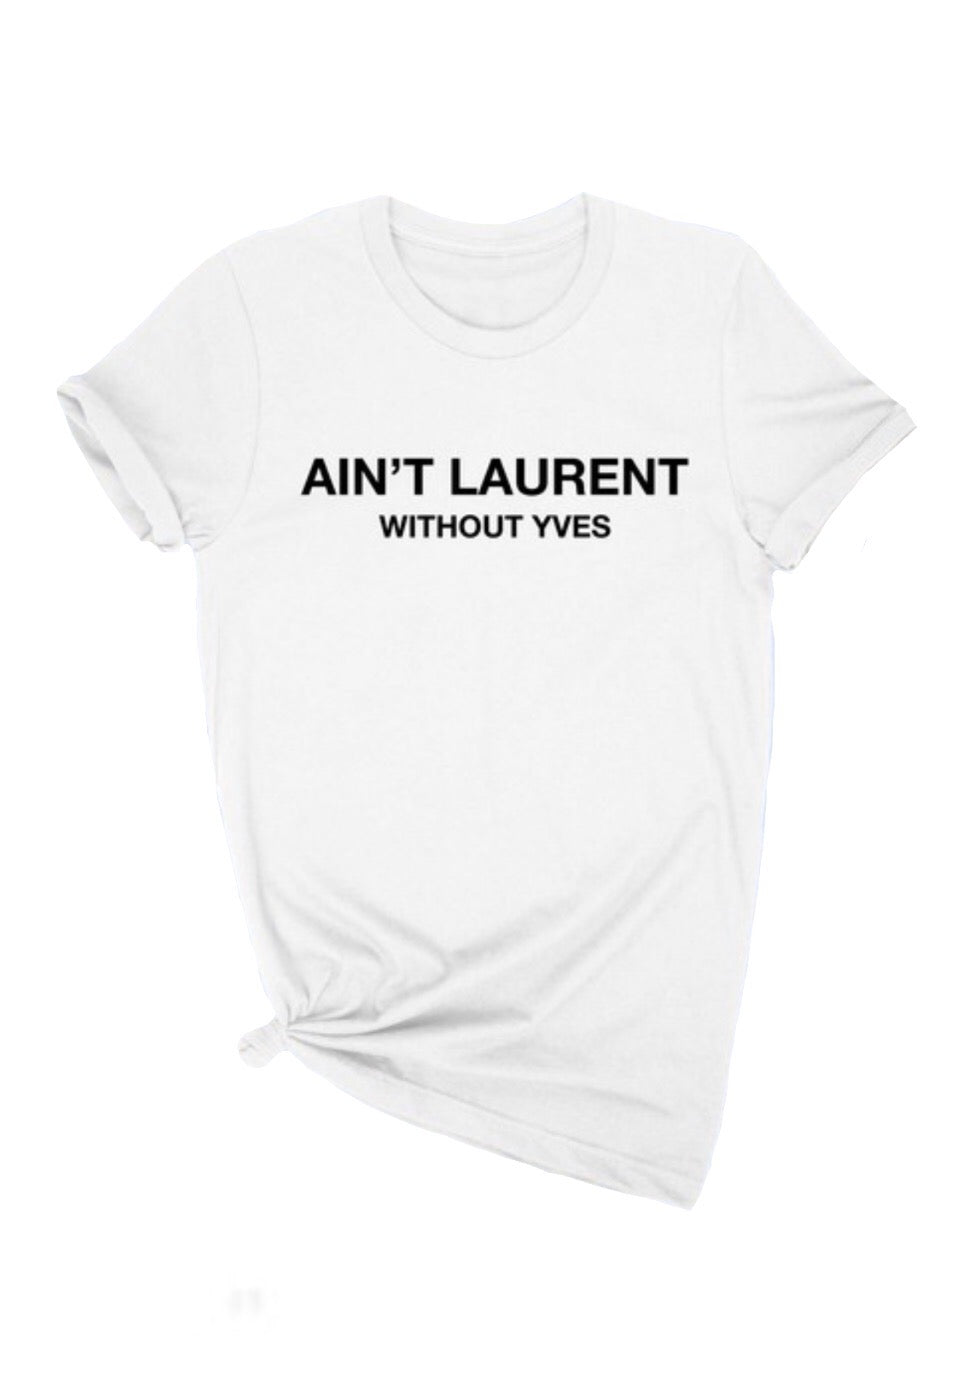 AIN’T LAURENT WITHOUT YVES